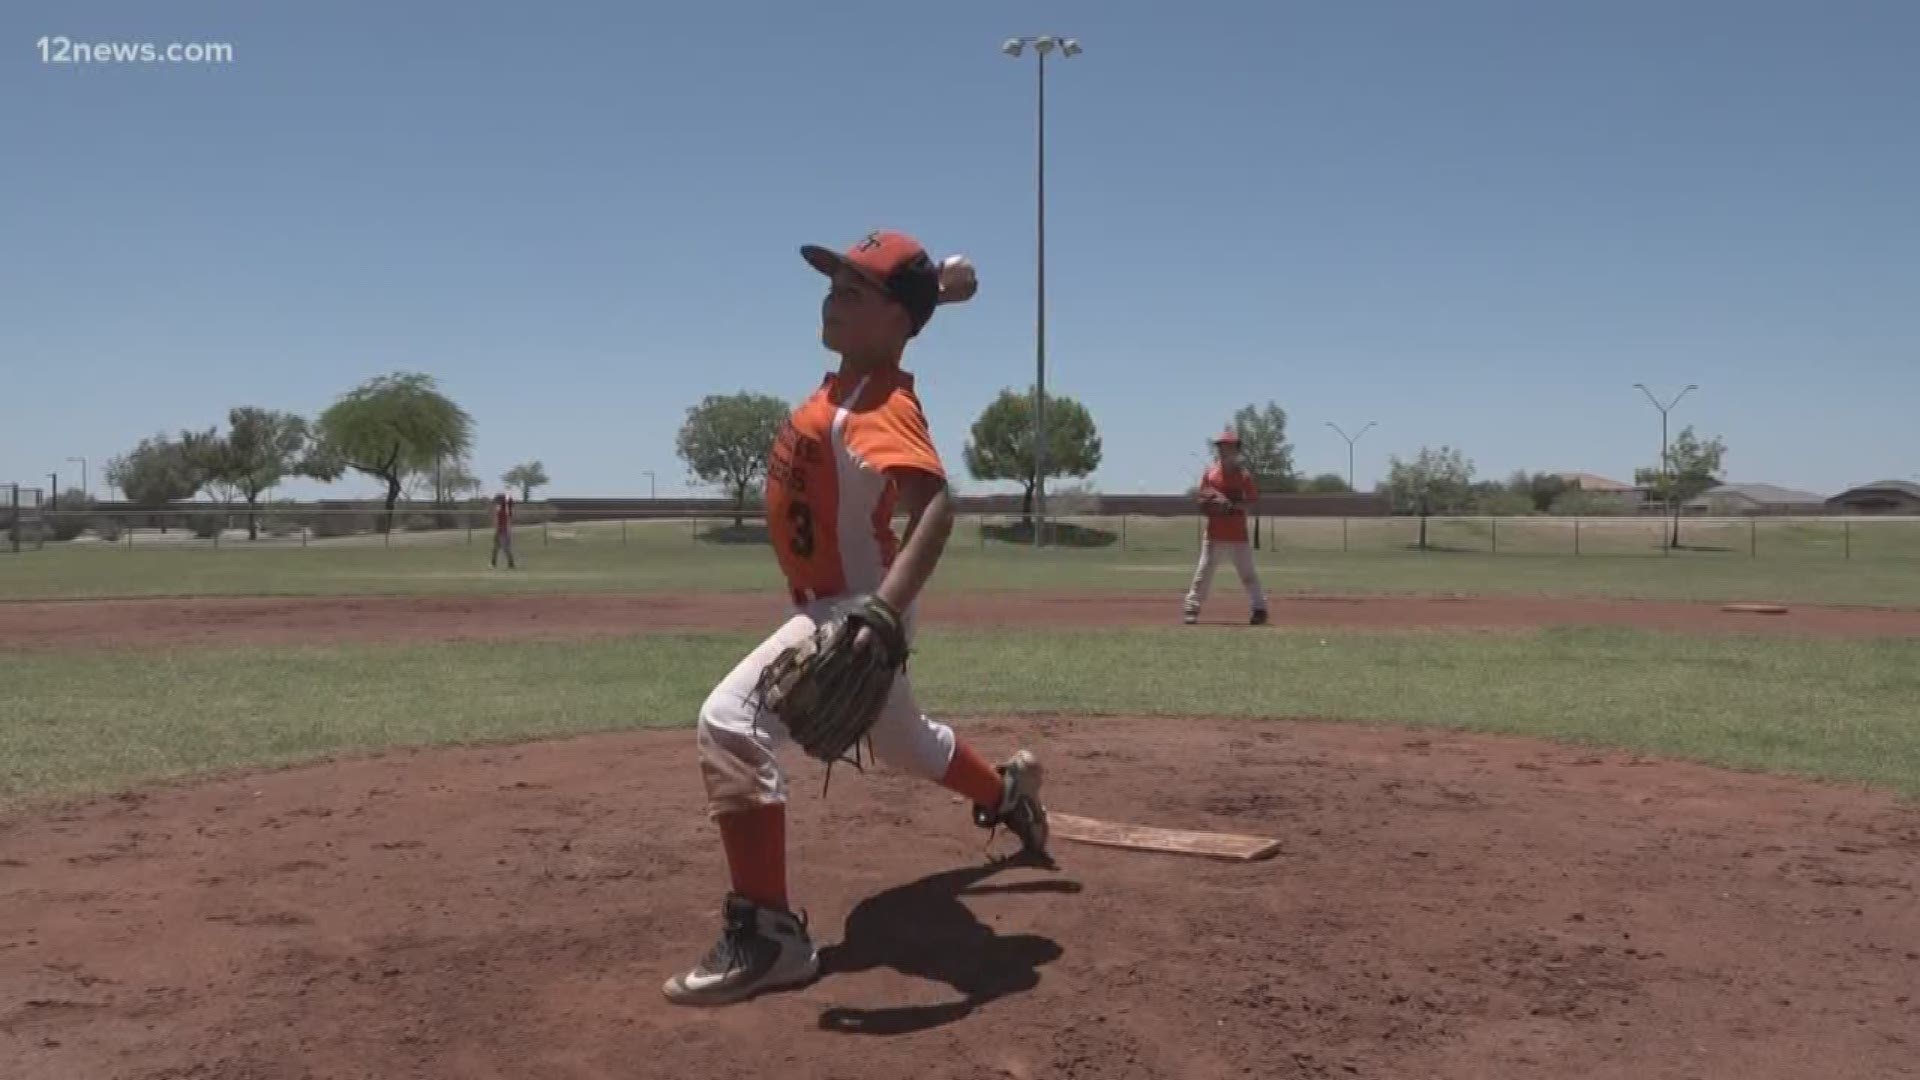 The Buckeye Tigers are headed to the USSSA World Series, and they need your help to get to the top.